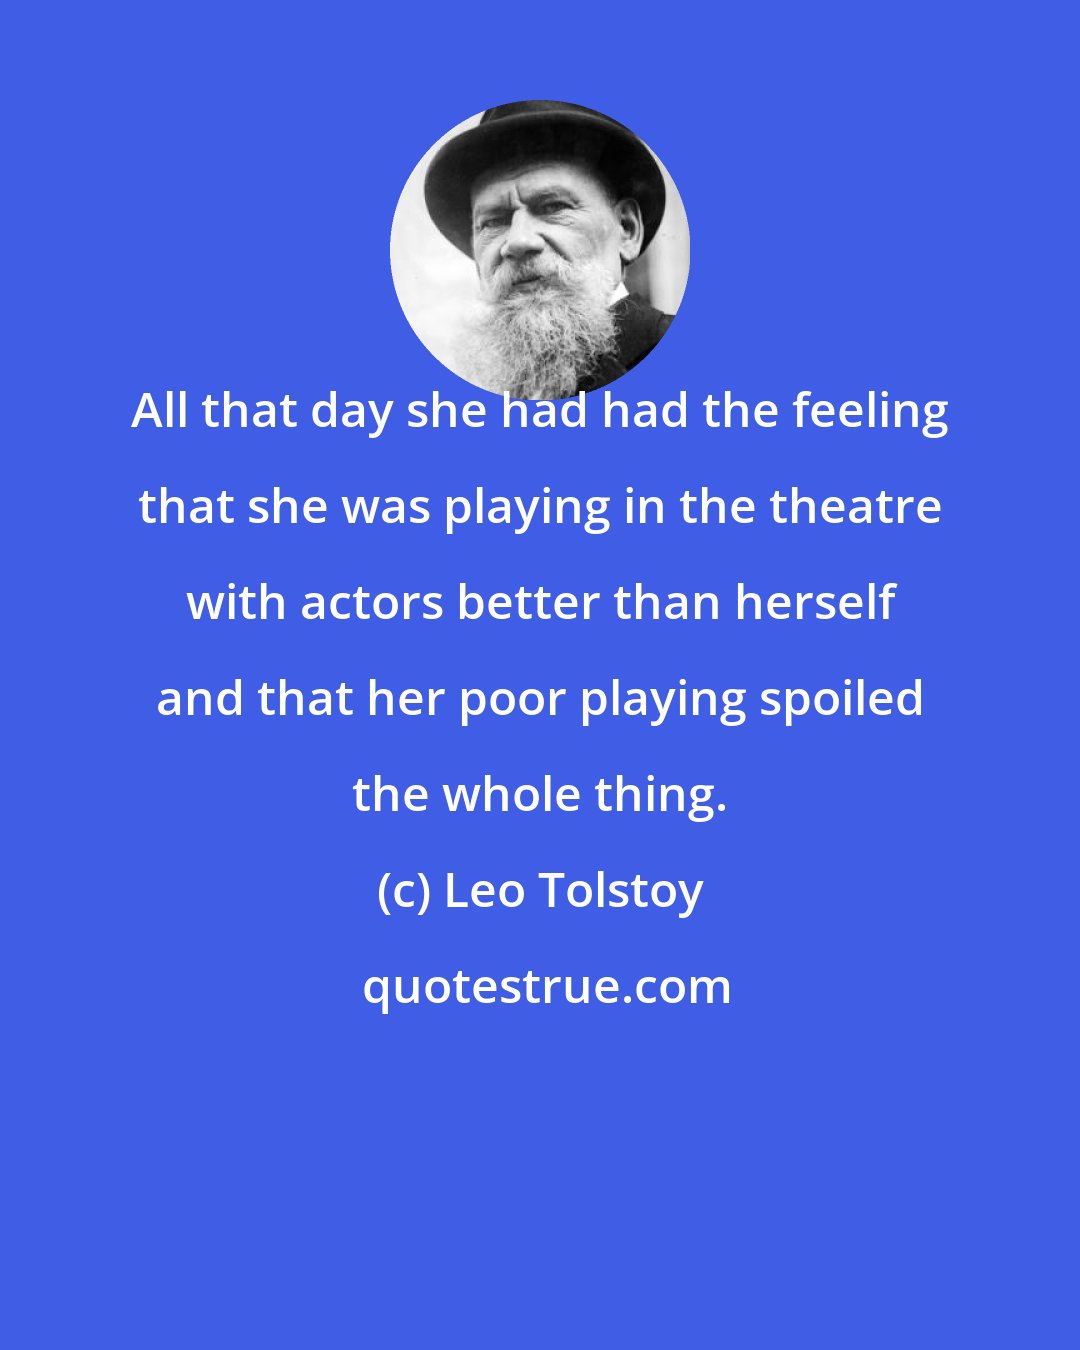 Leo Tolstoy: All that day she had had the feeling that she was playing in the theatre with actors better than herself and that her poor playing spoiled the whole thing.